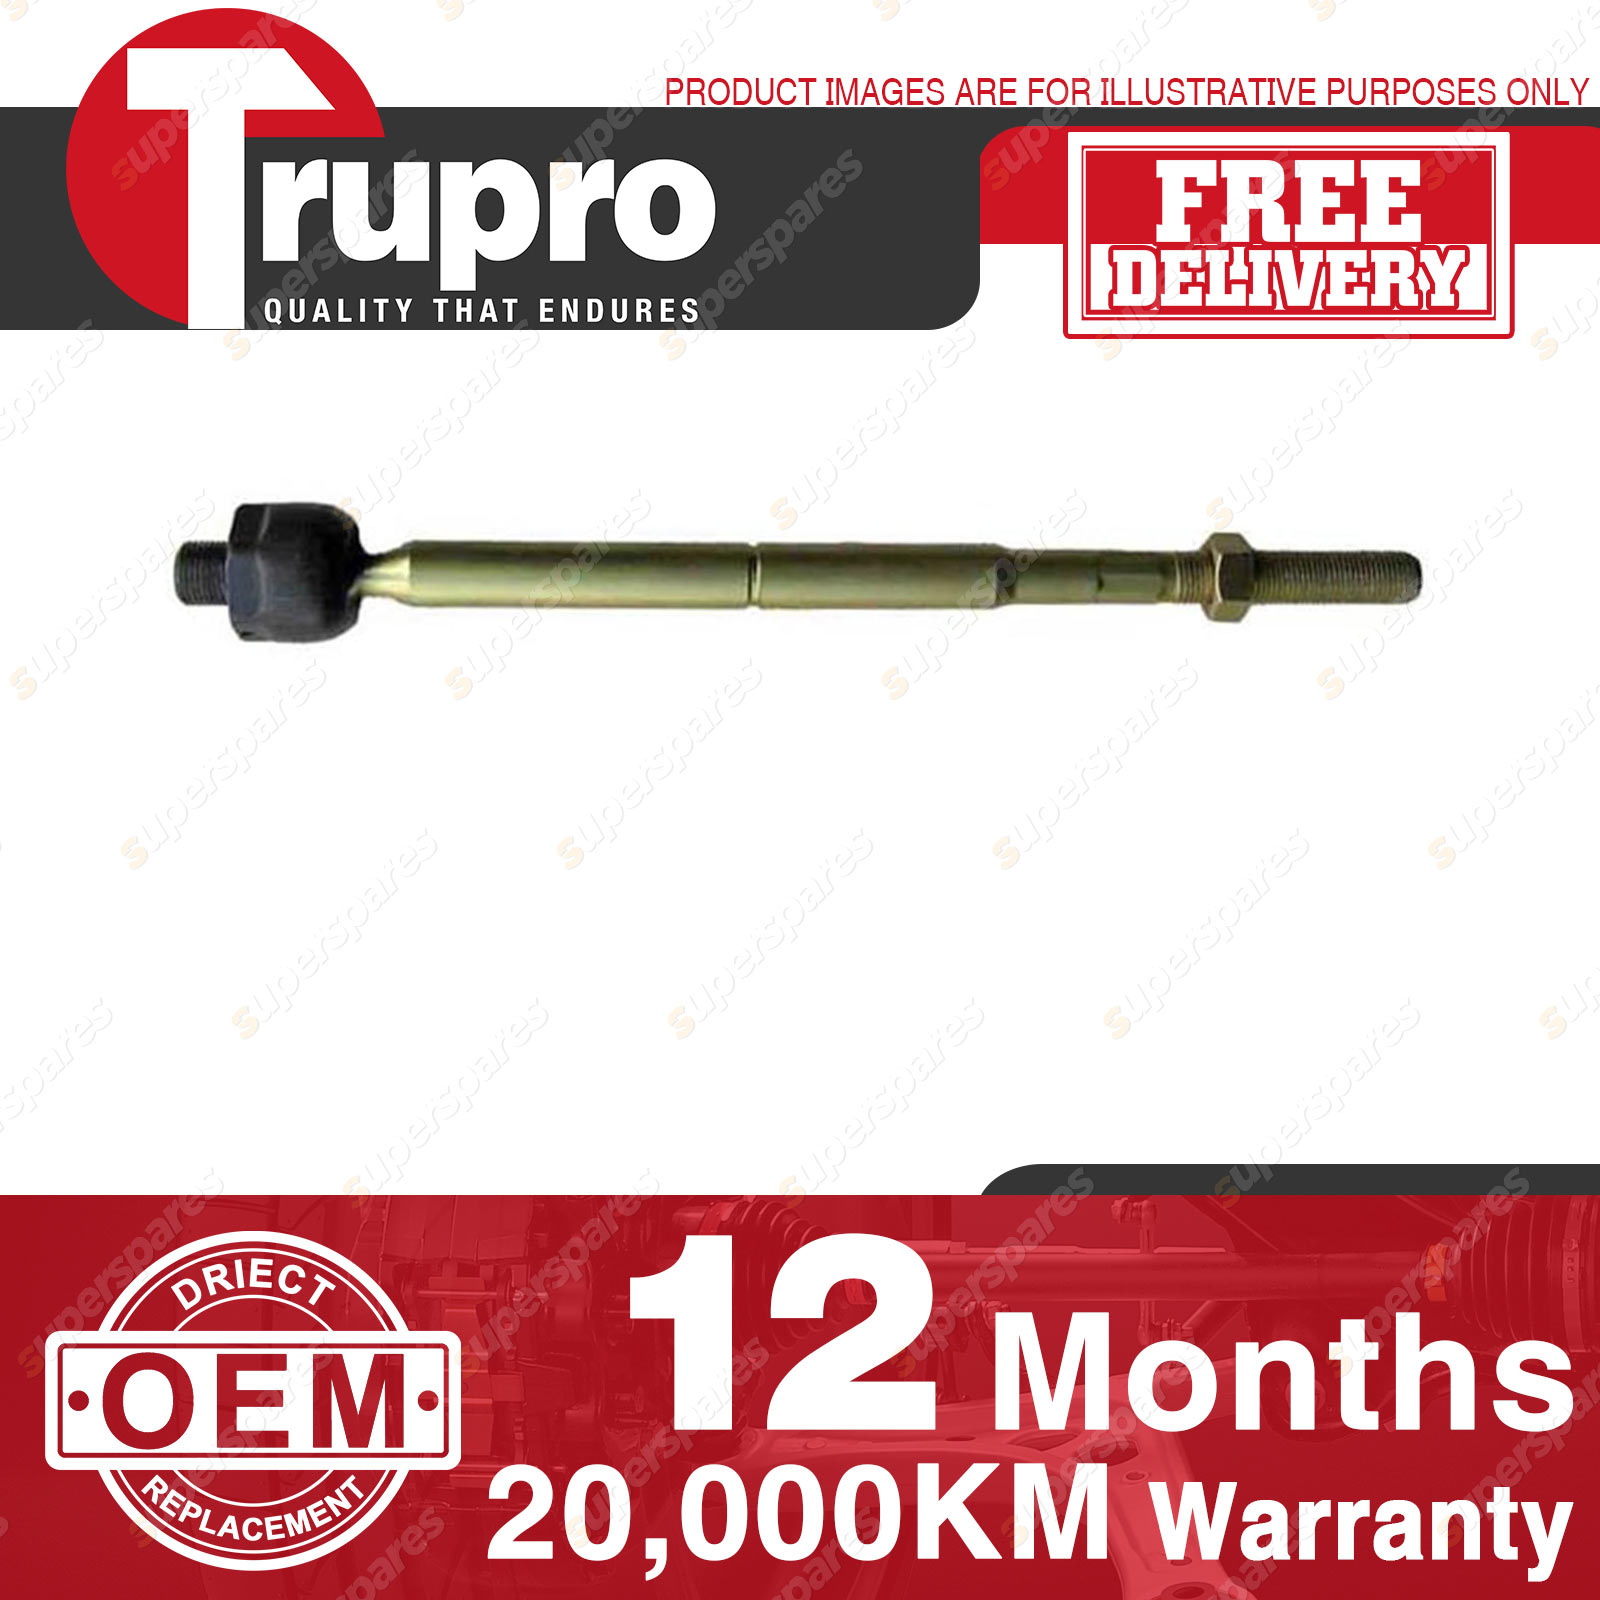 1 Pc LH Premium Quality Trupro Rack End for MAZDA 626 GE